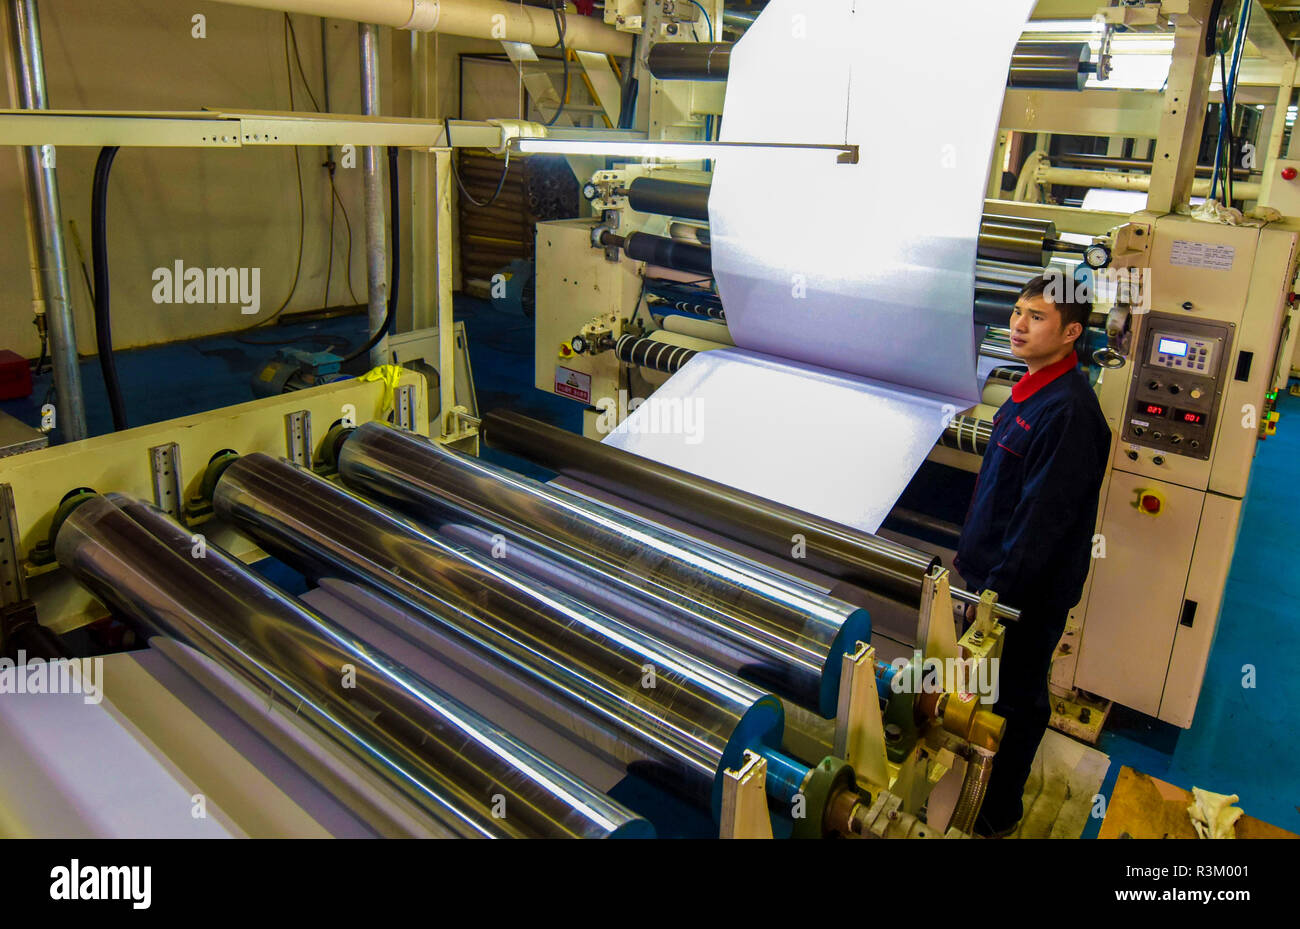 Hengshui, China's Hebei Province. 23rd Nov, 2018. A man works at a photographic paper production line at a digital technology company in Jizhou District of Hengshui, north China's Hebei Province, Nov. 23, 2018. The district gave stronger support for private enterprises in recent years. There are more than 4,700 medical, composite material, and equipment manufacture private enterprises in Jizhou. Credit: Li Xiaoguo/Xinhua/Alamy Live News Stock Photo